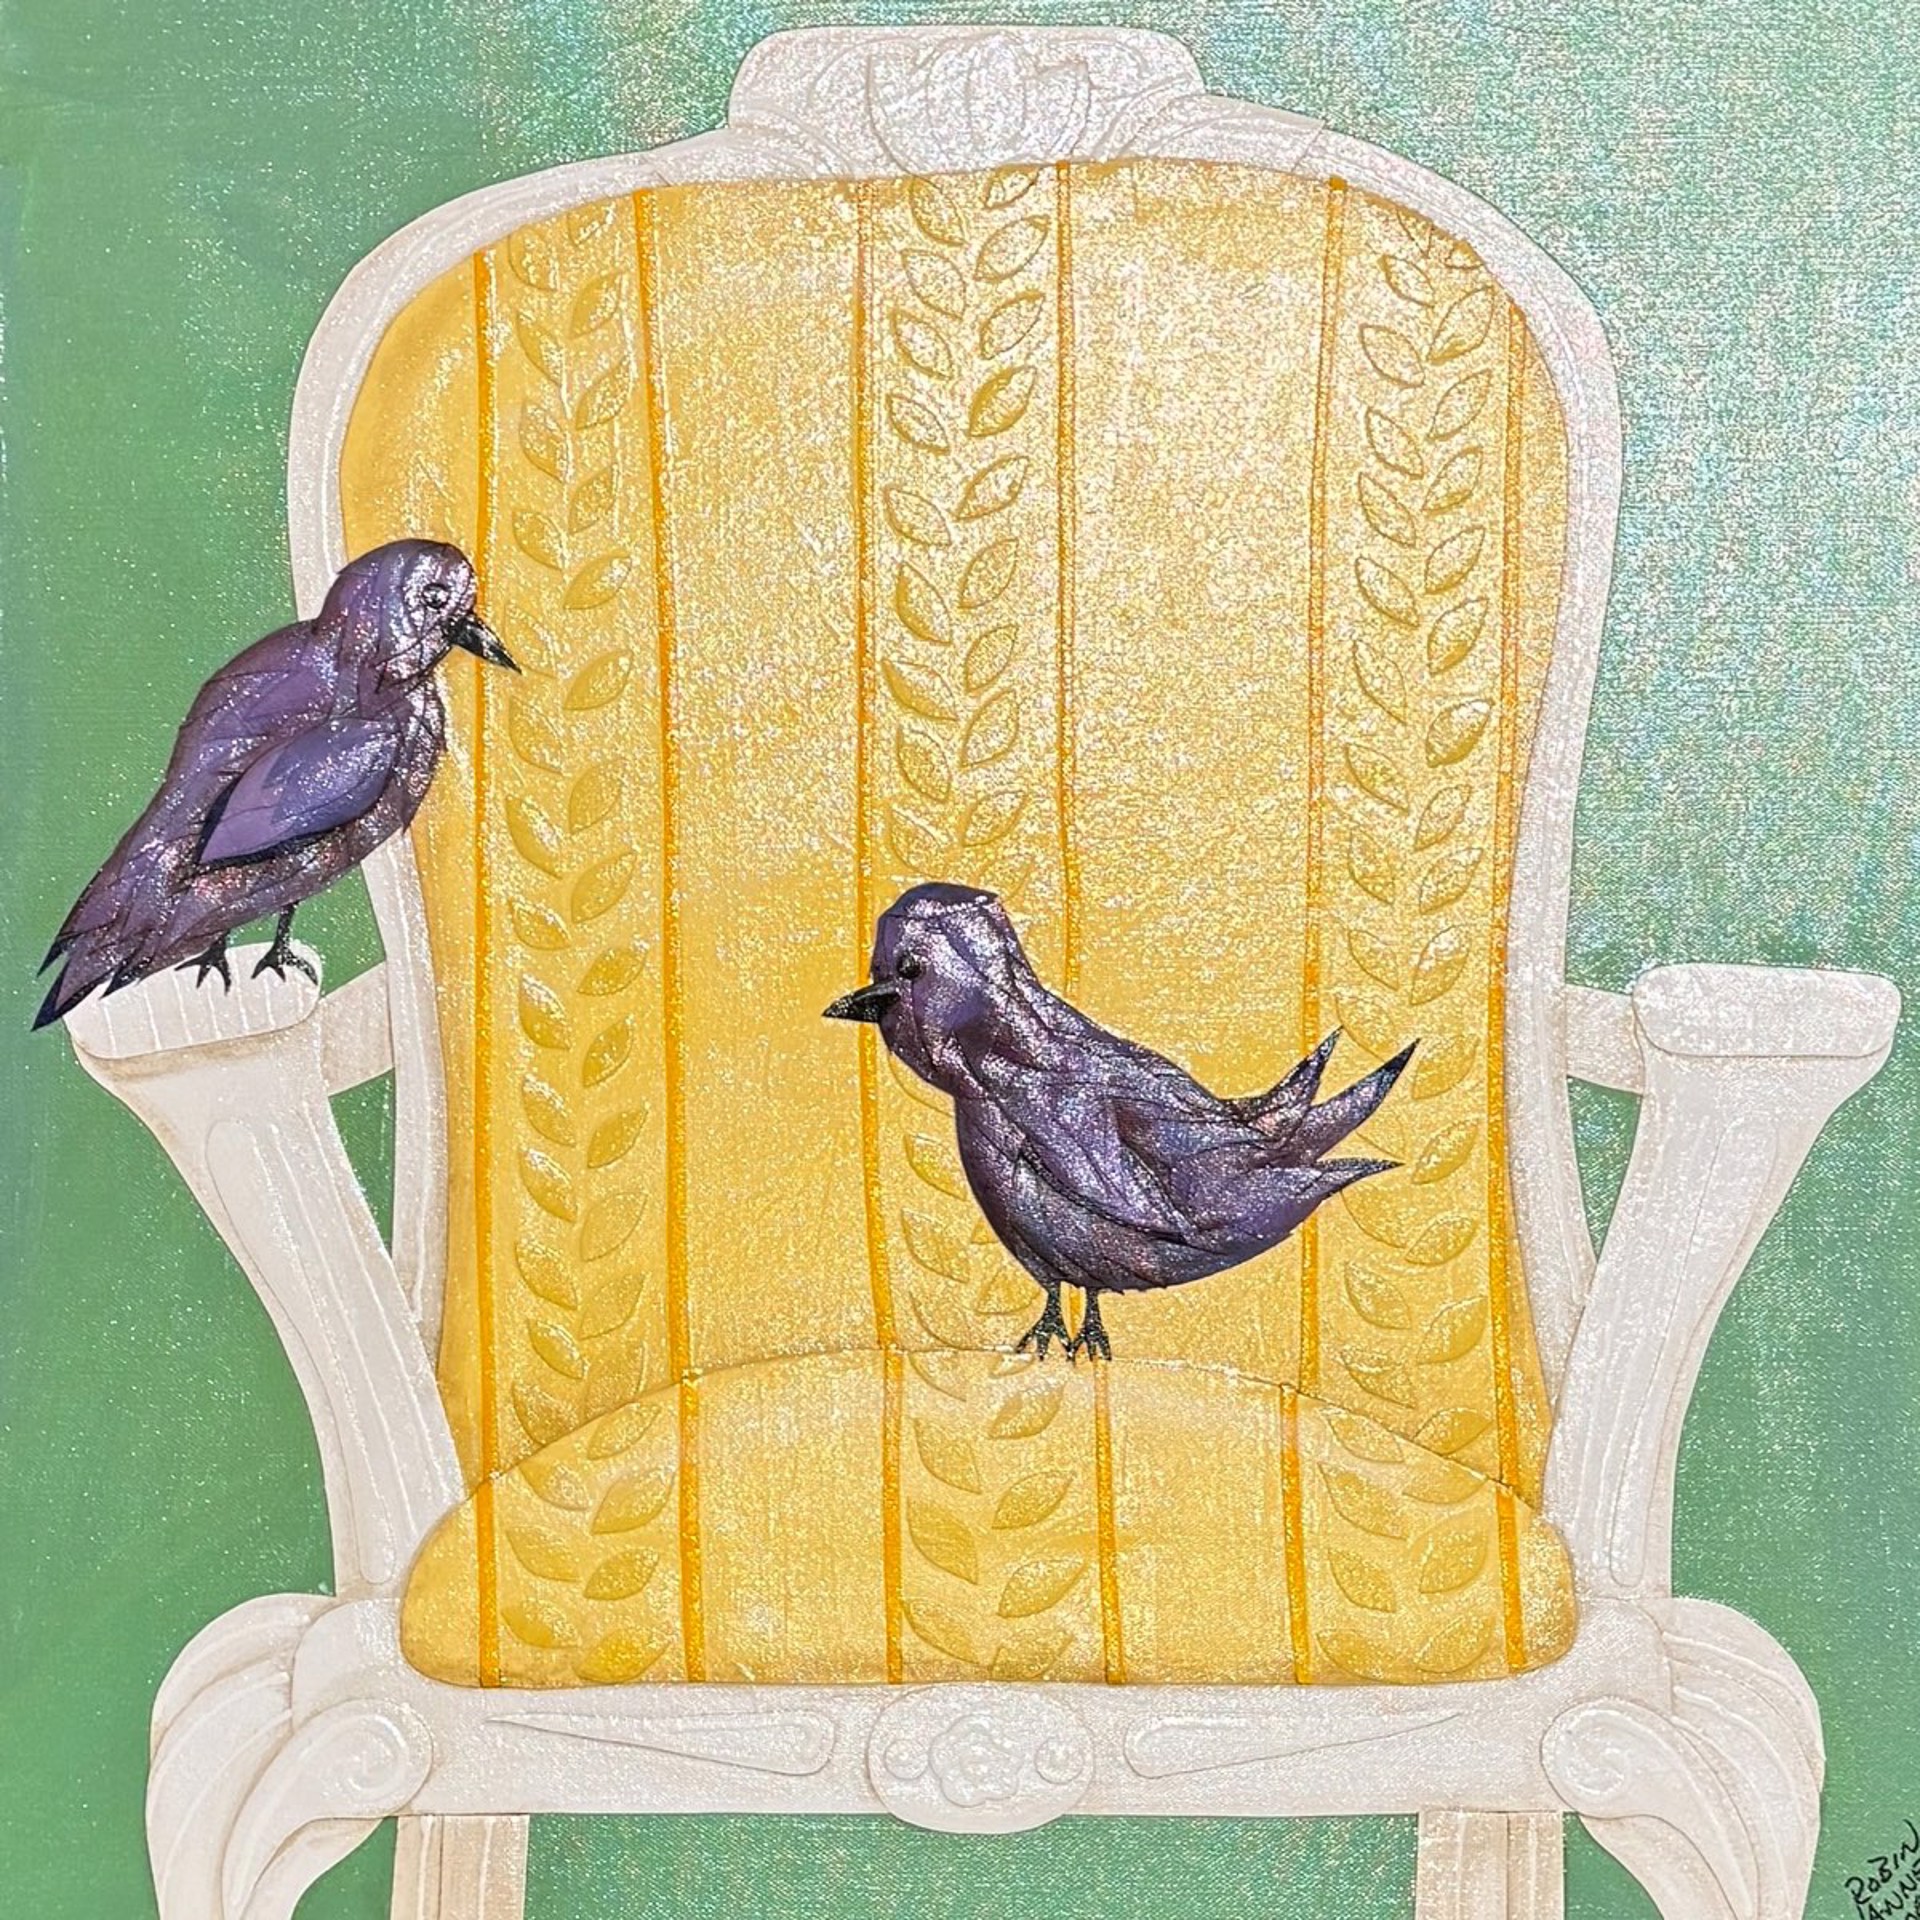 Purple Martins Visit on Ornate Yellow Chair by Robin Cooper